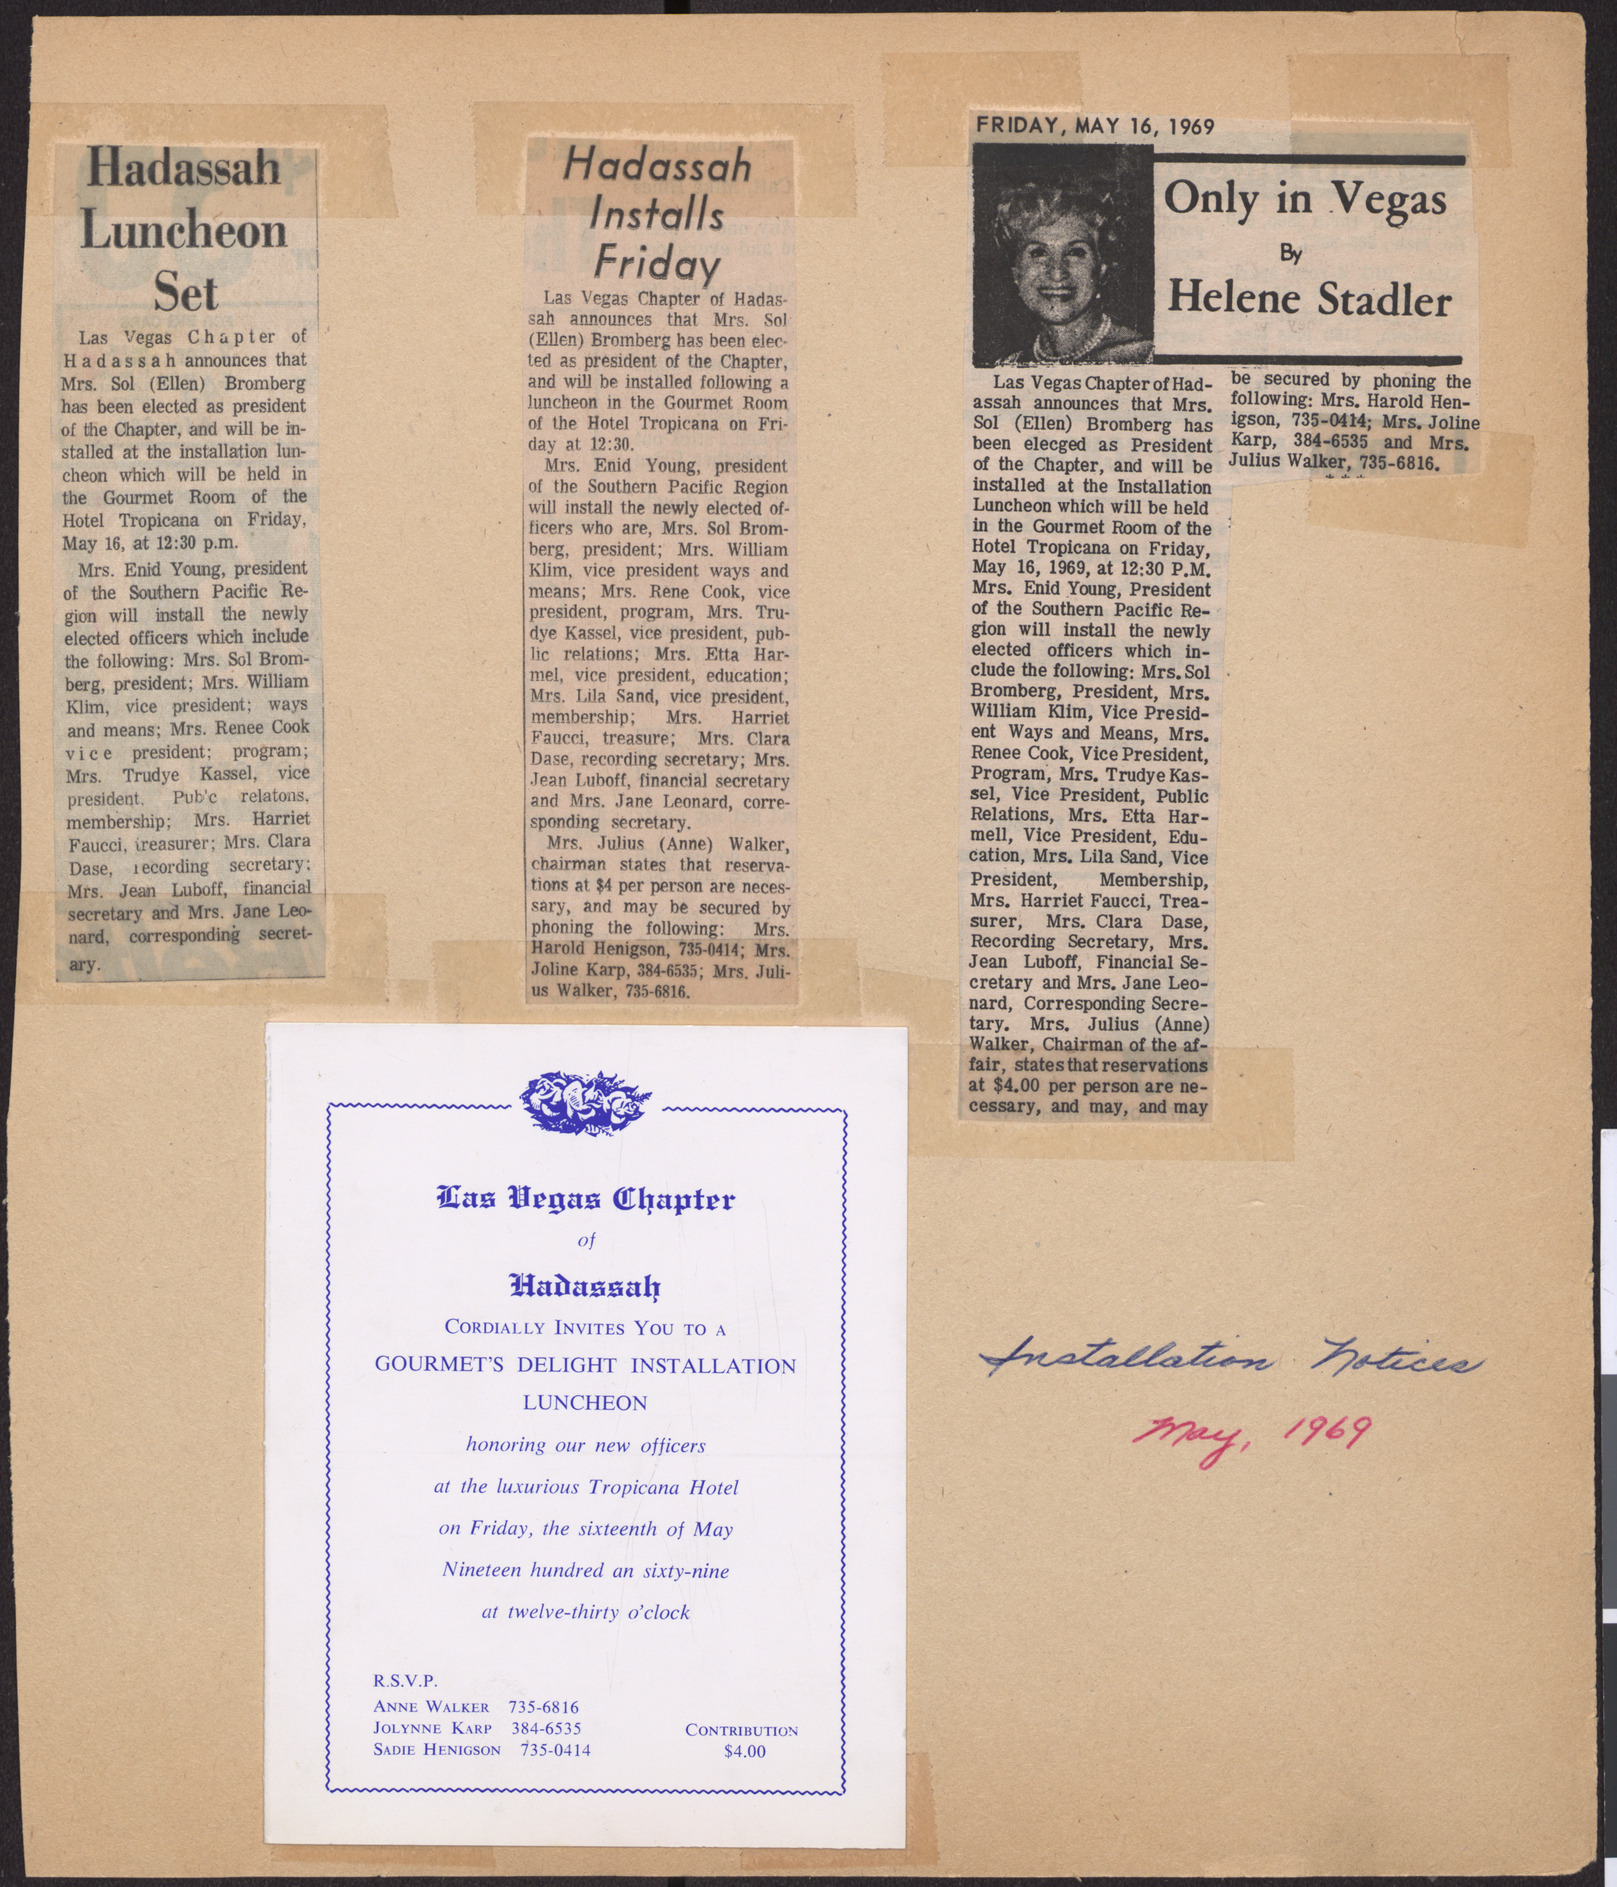 Newspaper clippings about Hadassah officer installation luncheon and event invitation, May 1969